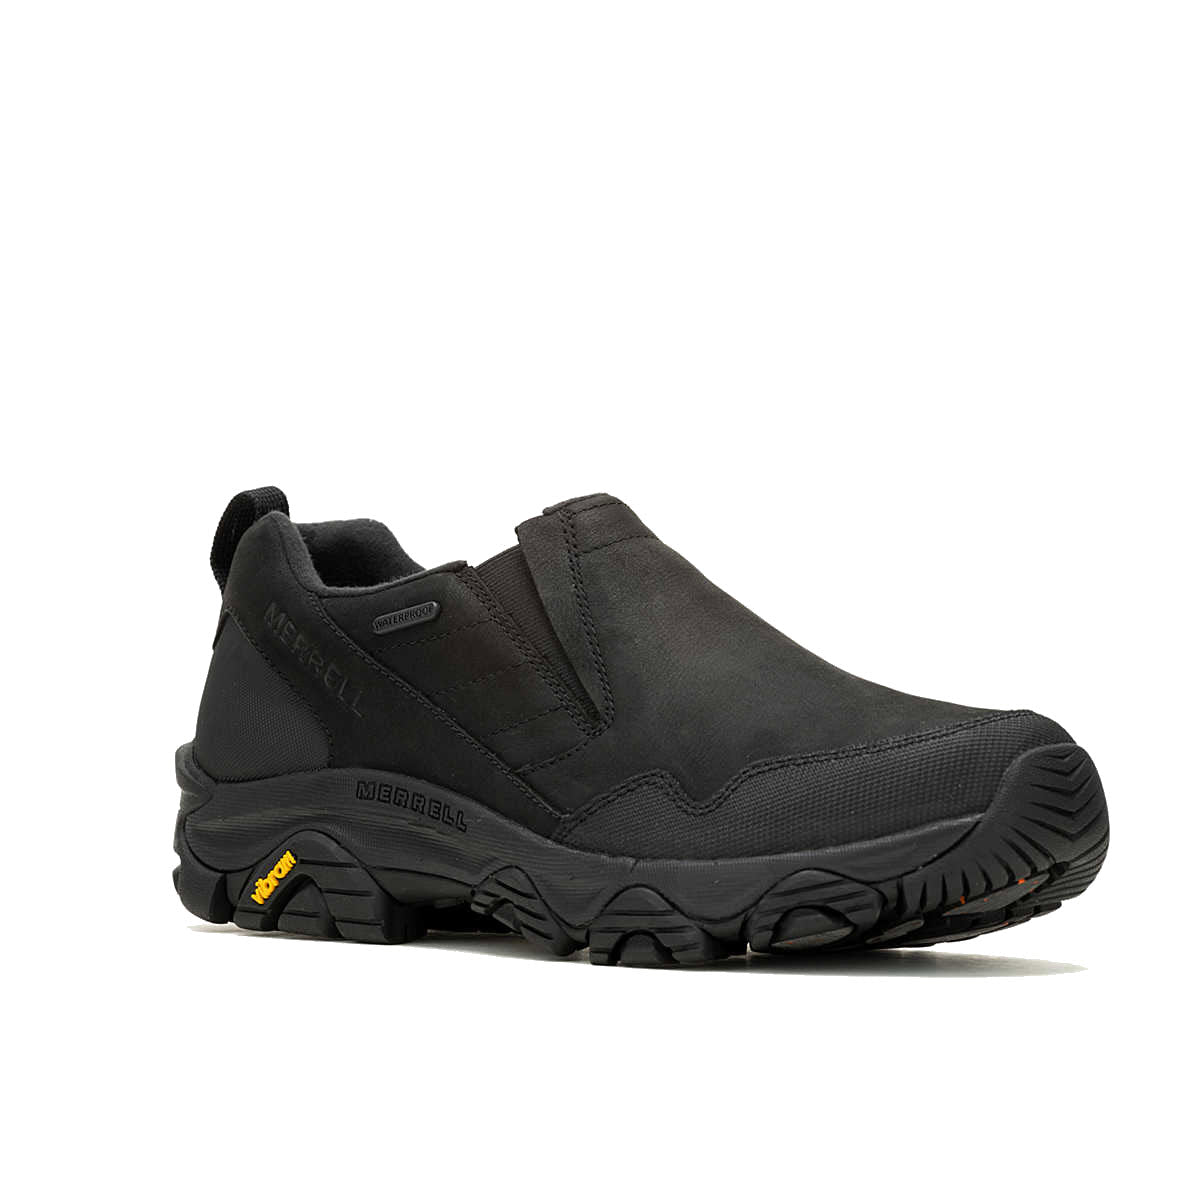 Black Merrell Coldpack 3 Thermo Moc WP slip-on hiking shoe with rugged sole and yellow logo detailing, featuring Vibram Arctic Grip on a white background.